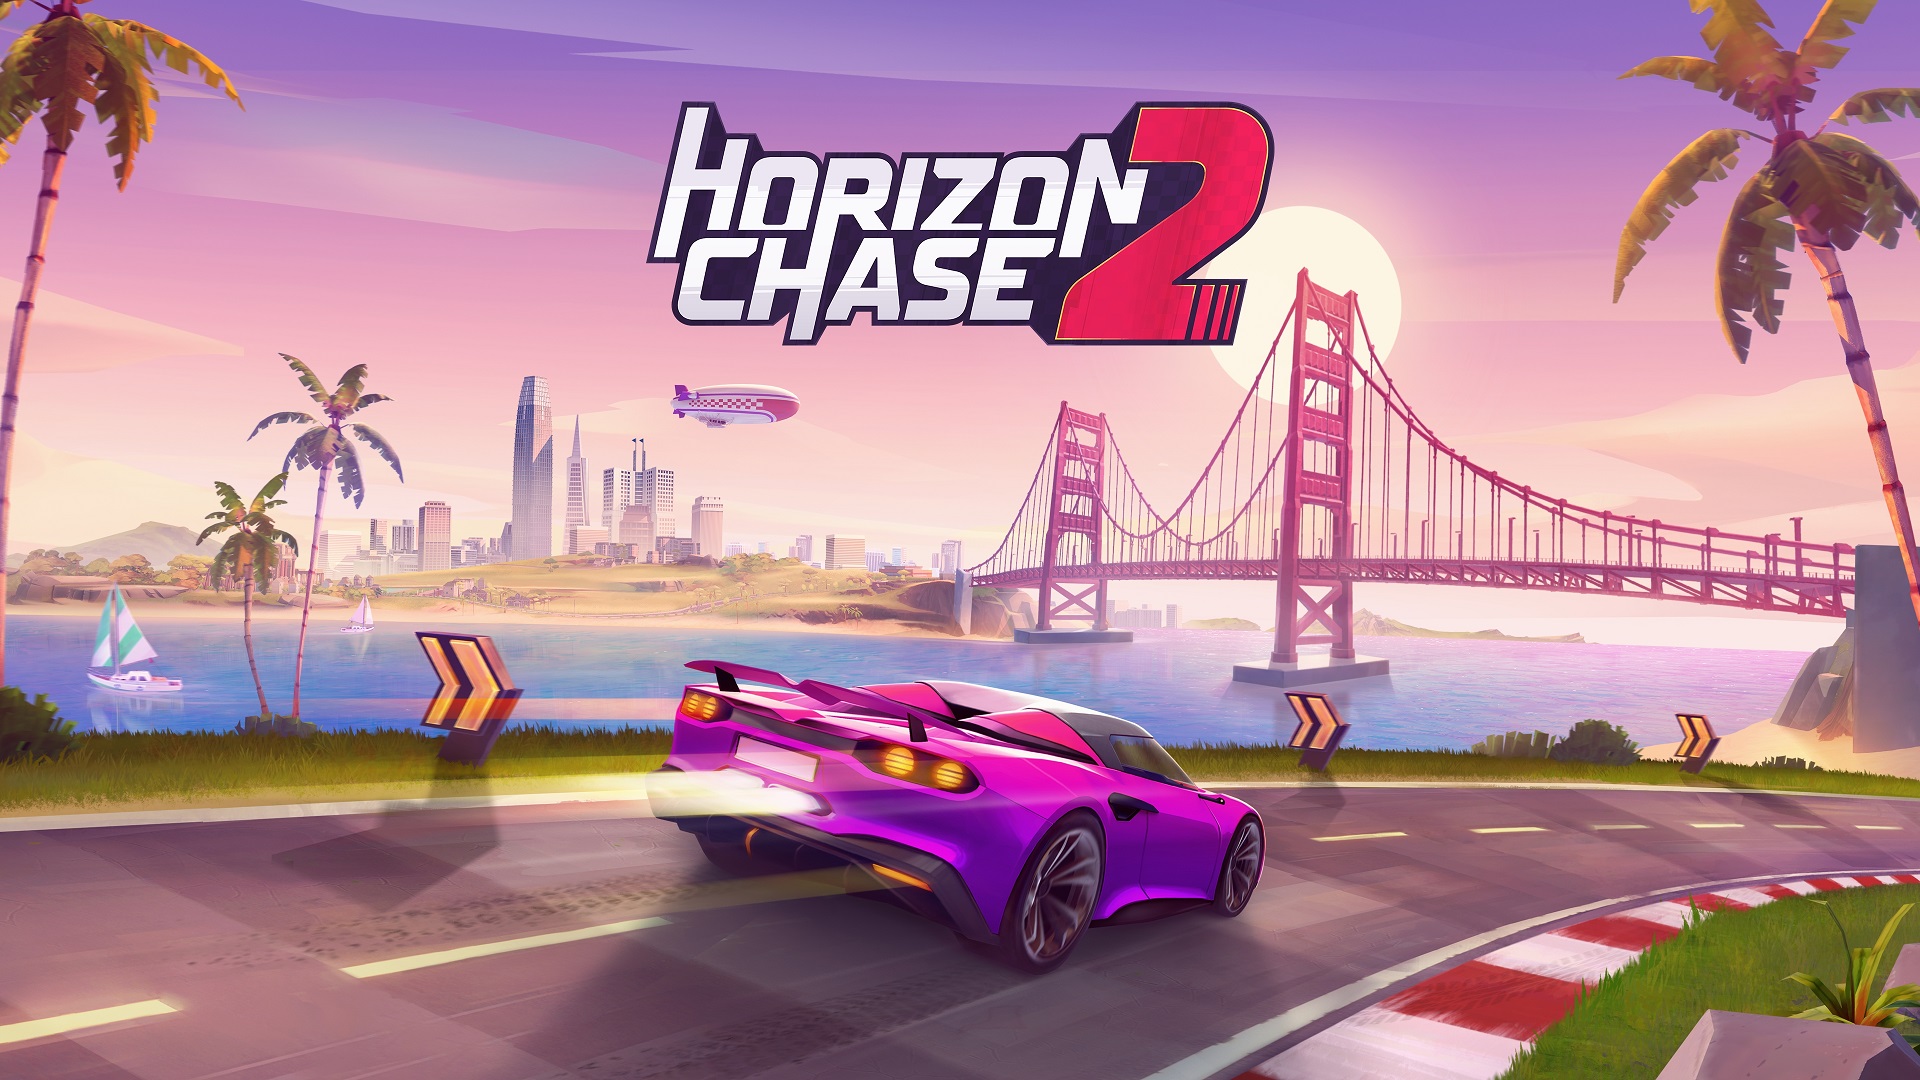 Horizon Chase 2 announced for Apple Arcade, PC, and consoles